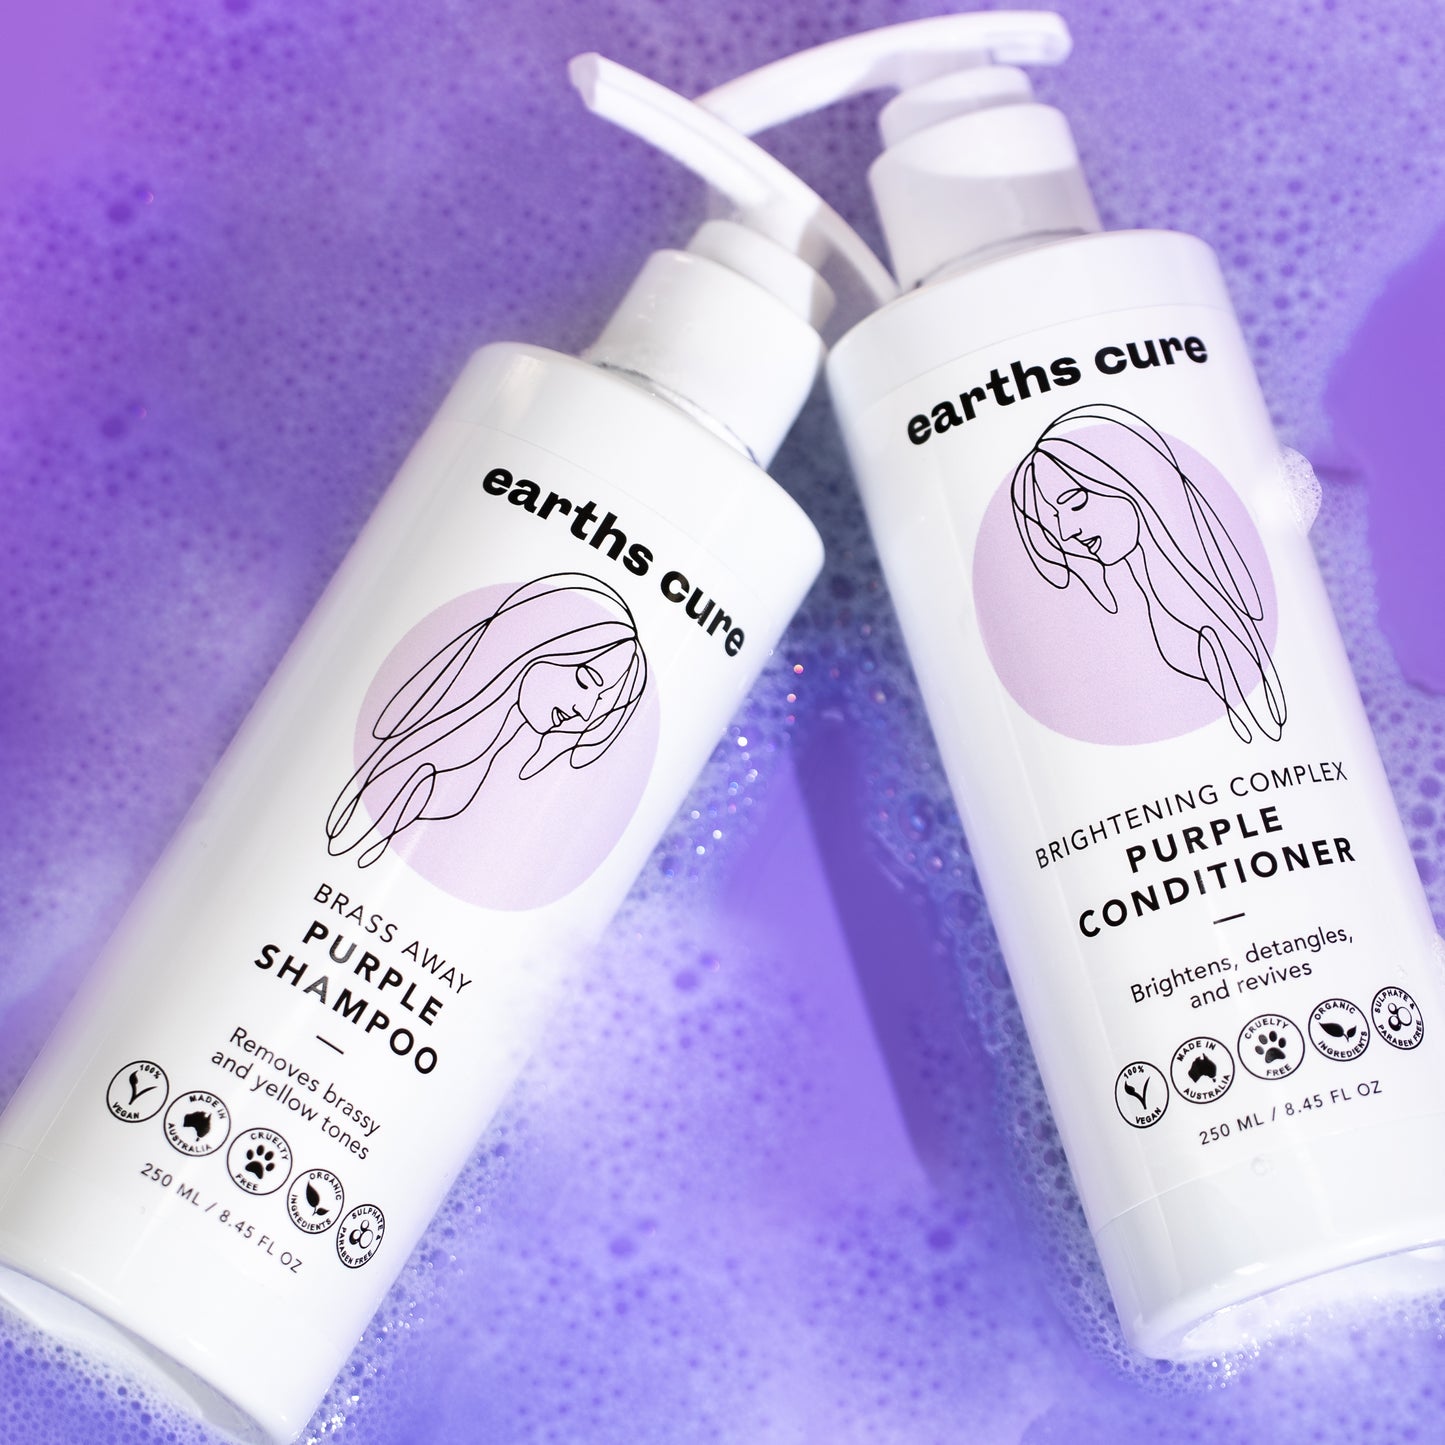 Silver Hair Products: Purple Shampoo and Purple Conditioner in bath tub with purple water